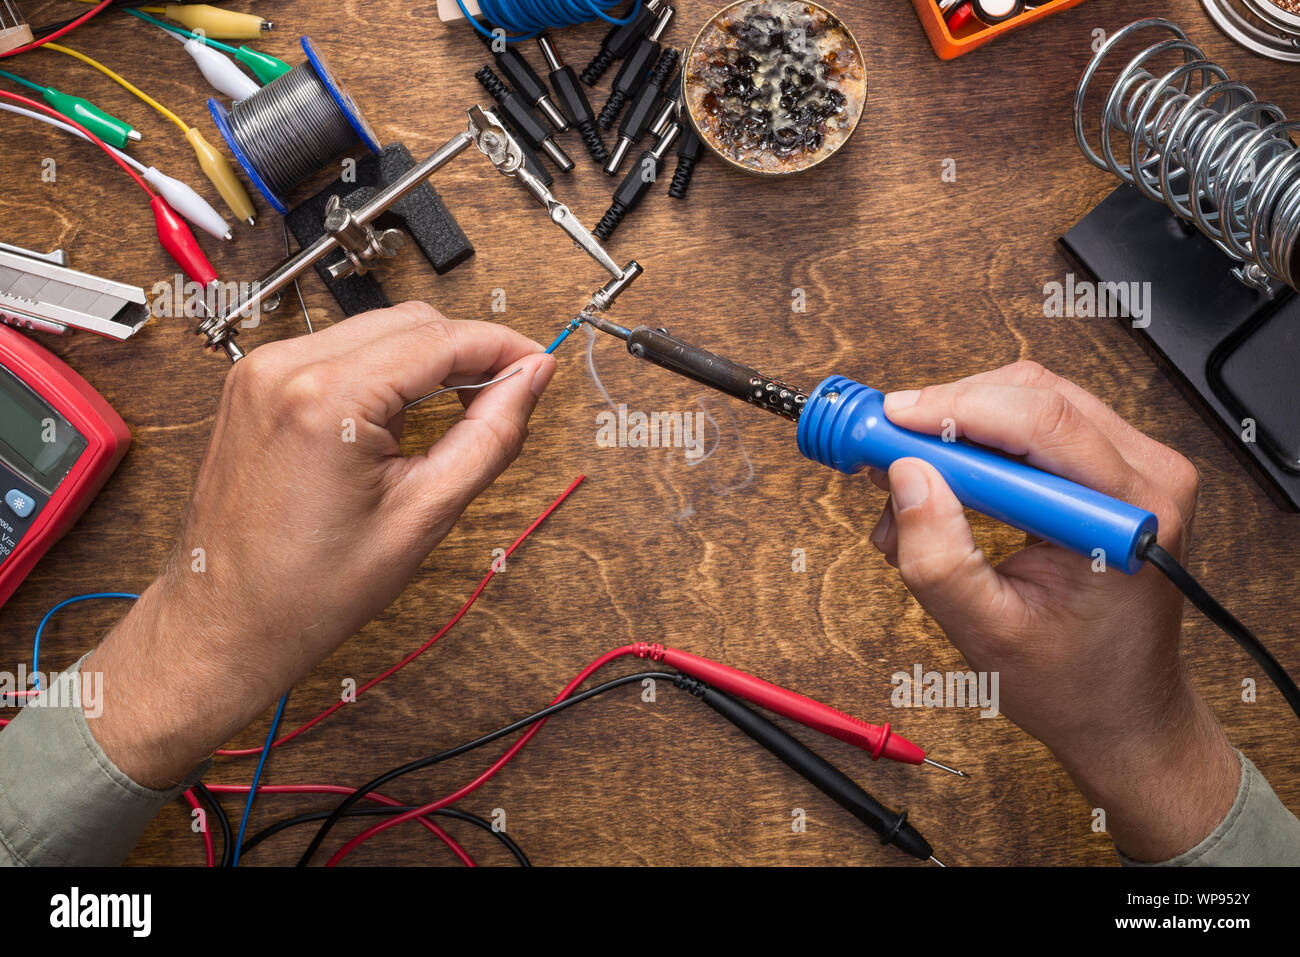 Hands soldering wires. Working with electronics. DIY, repair concept. Stock Photo